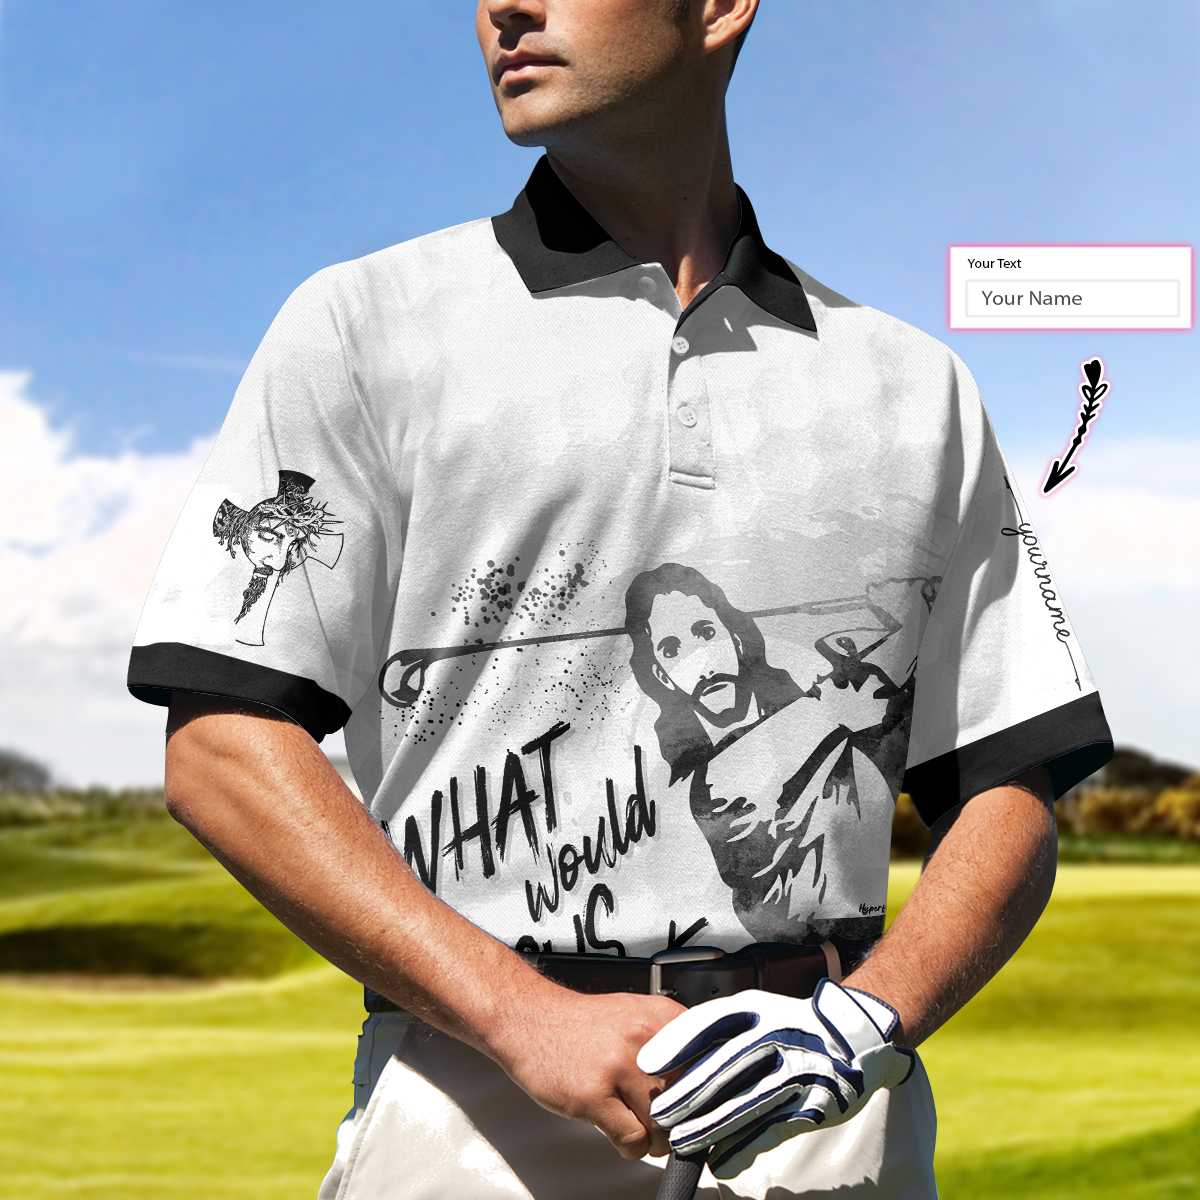 customized golf shirt for men black and white polo with jesus choice of weapon gp432 m7kbj